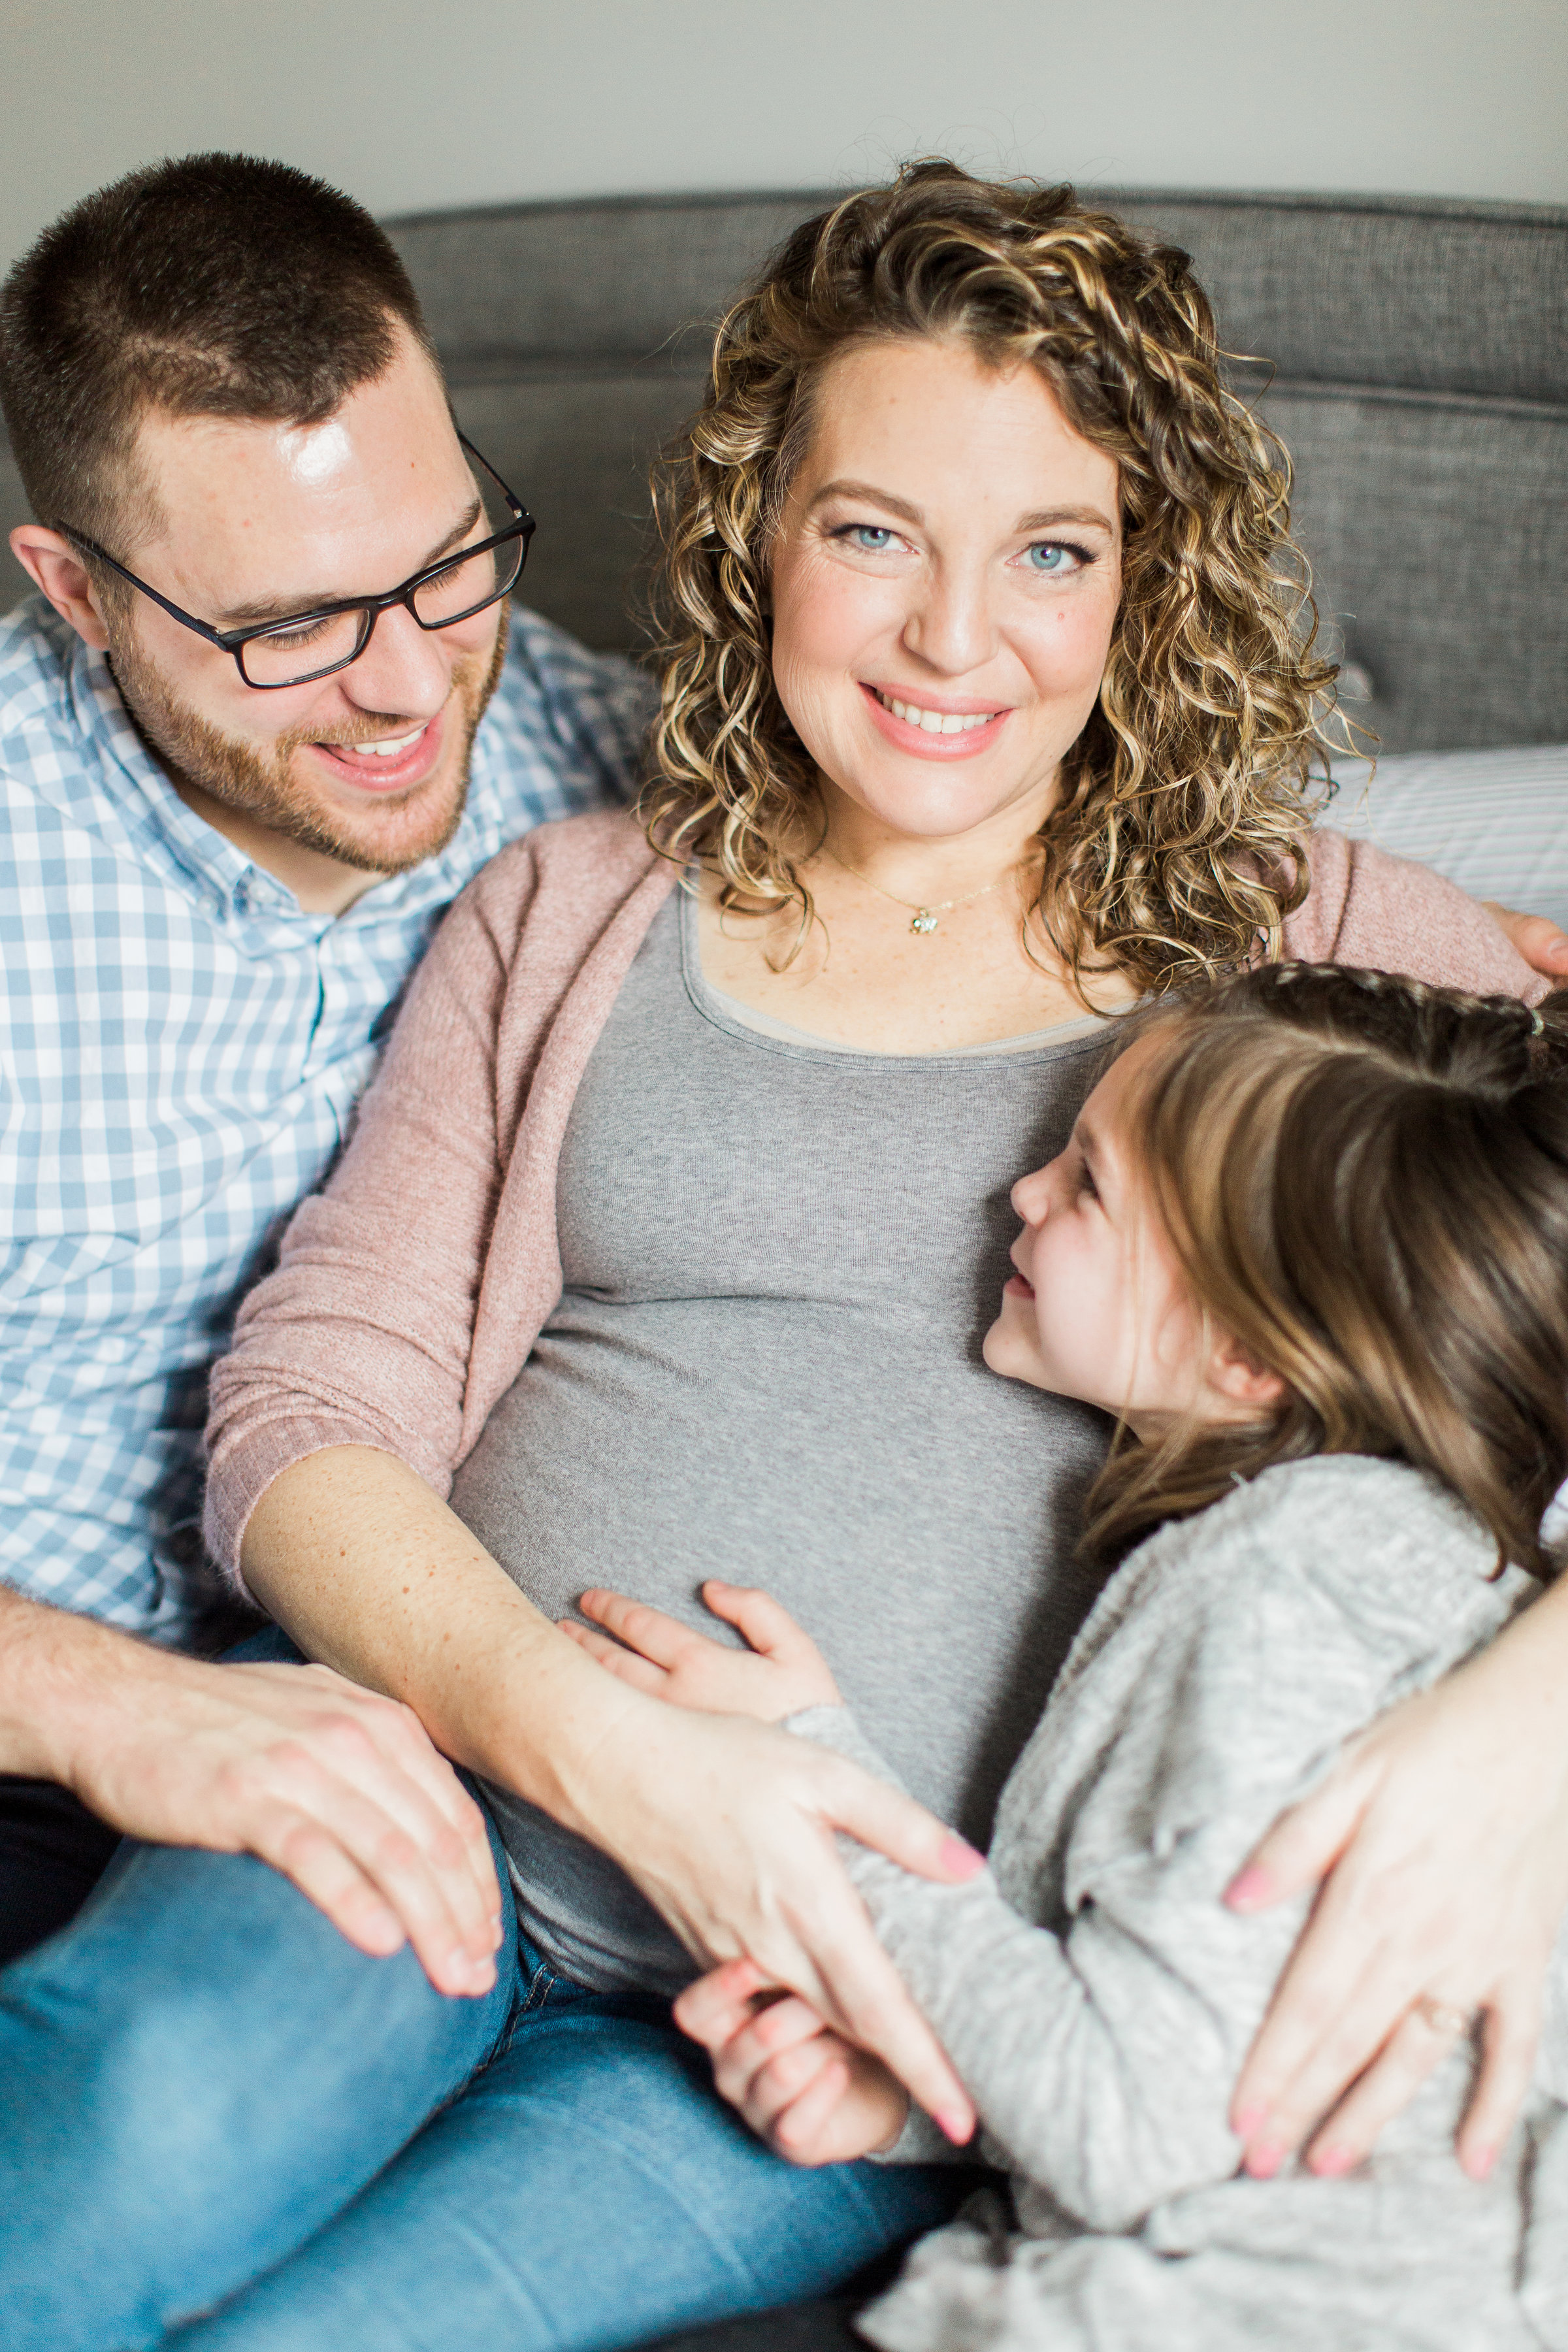 In Home Maternity and Family Photo Session || Lynchburg Virginia Photographer 